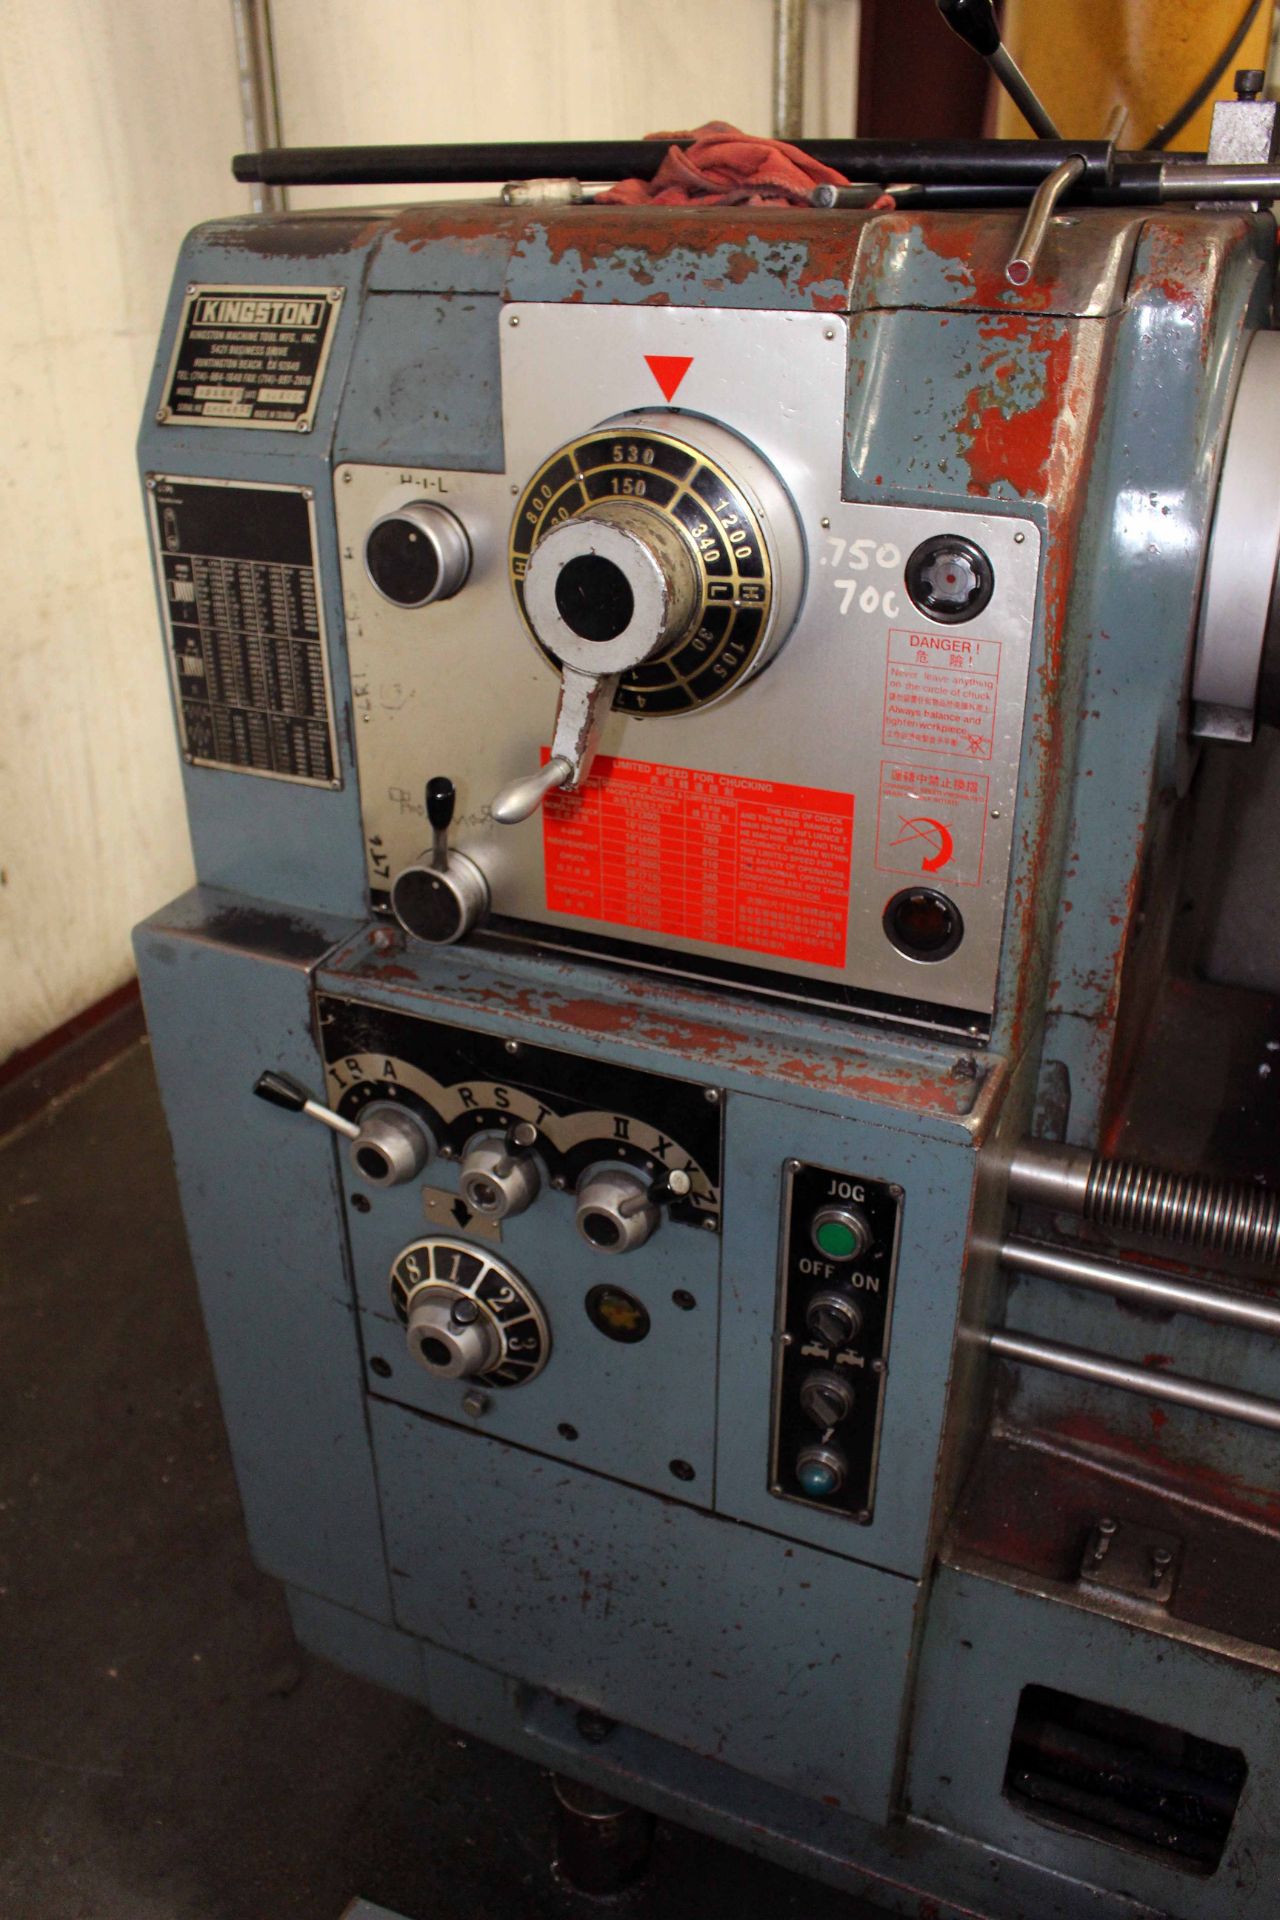 GAP BED ENGINE LATHE, KINGSTON (CHIN HUNG) 22" X 90" MDL. HD2290, new 2005, 4.15" spdl. hole, - Image 4 of 4